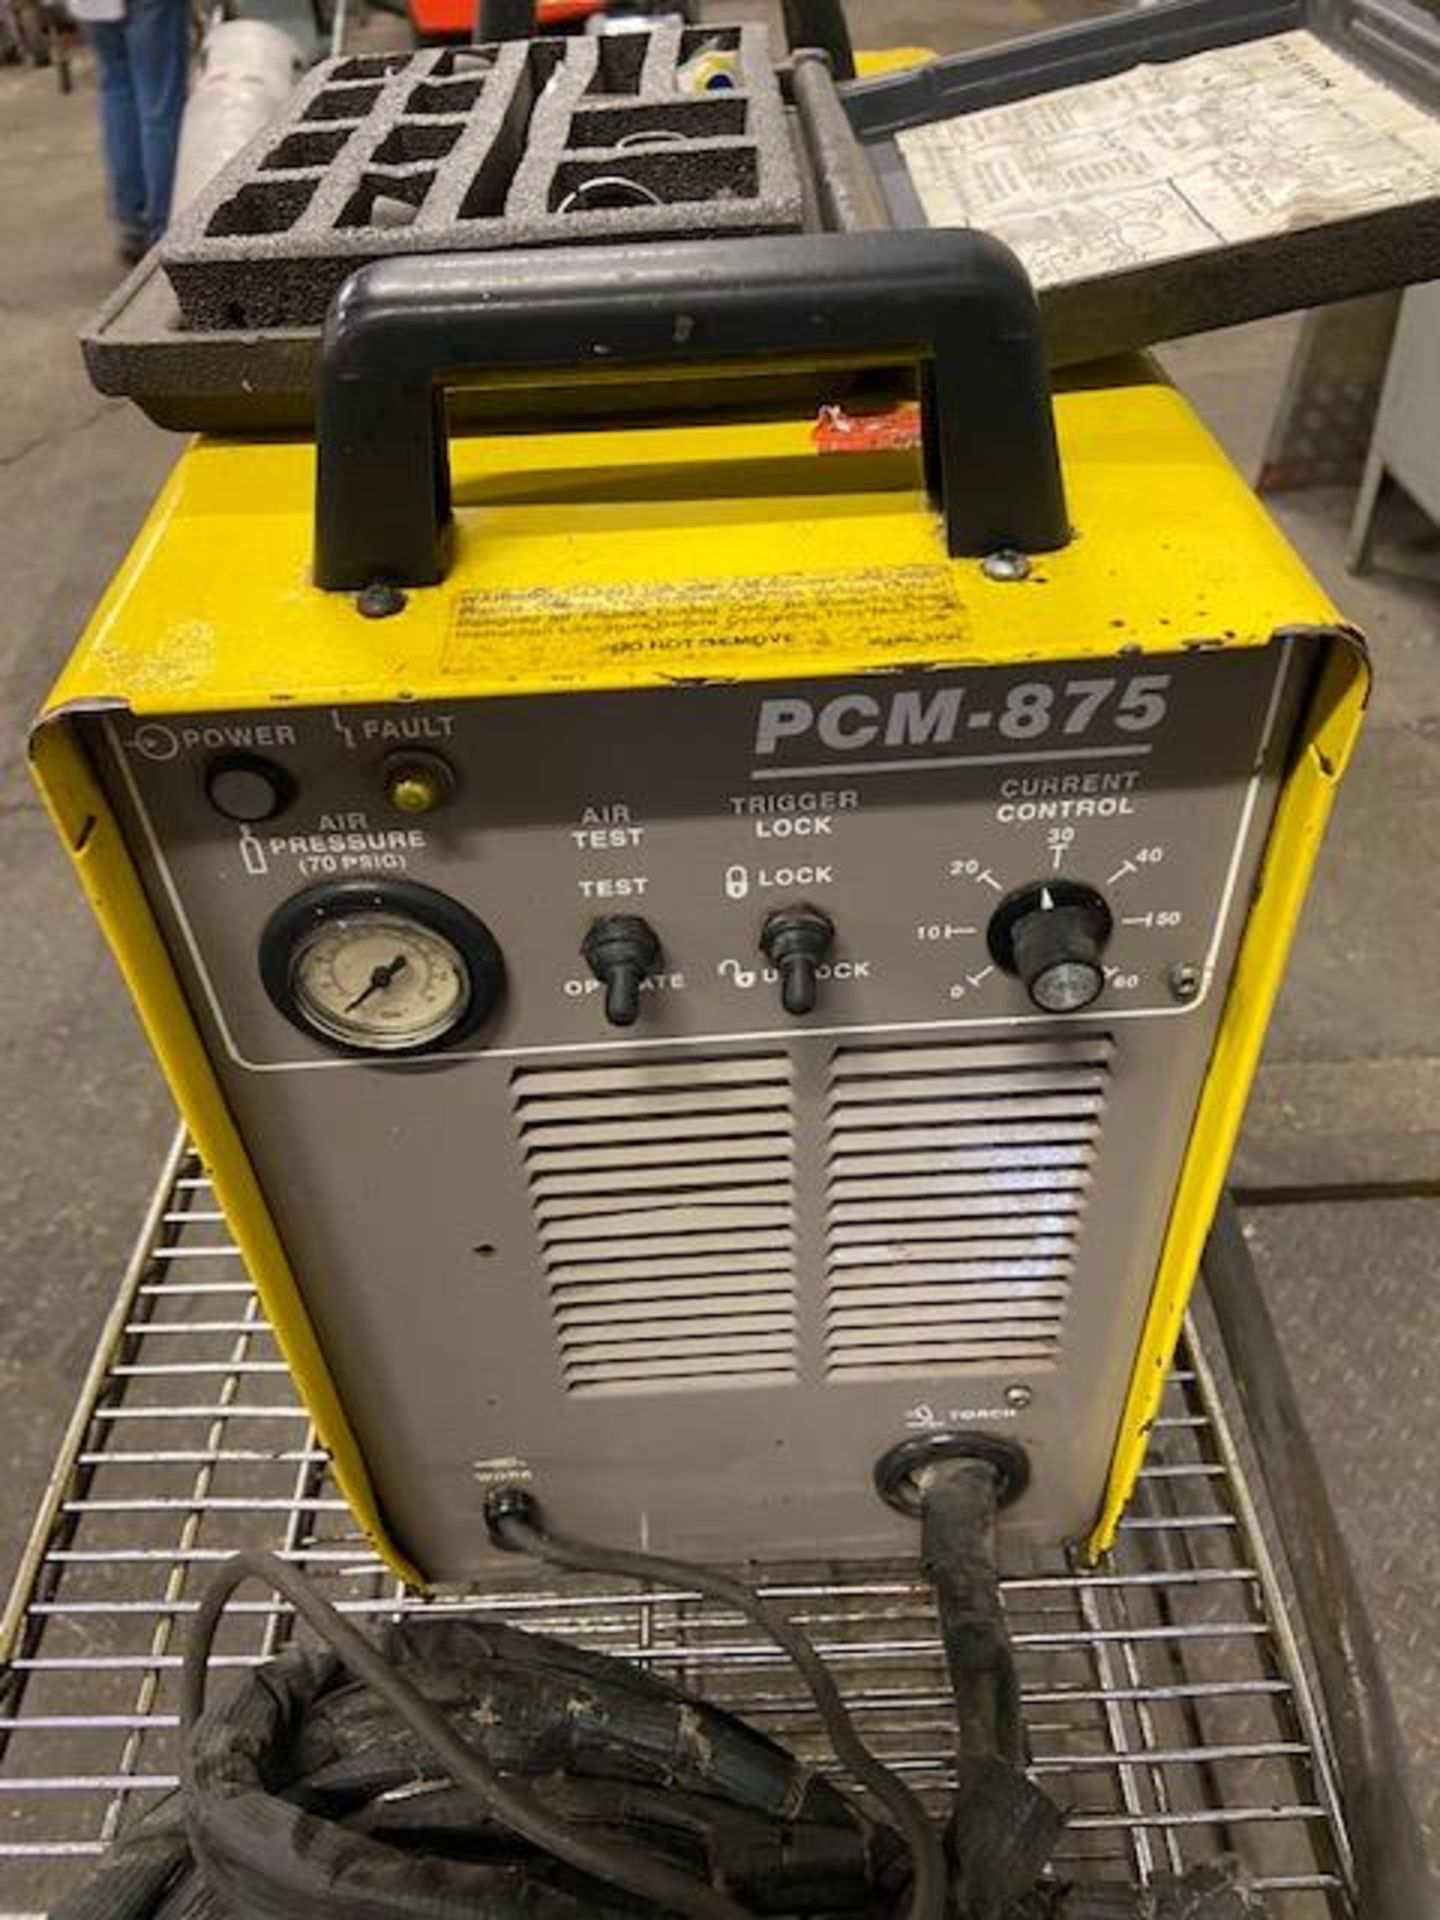 Esab PCM-875 Plasma Cutter unit - 55 amp 3 phase with plasma gun complete with accessories